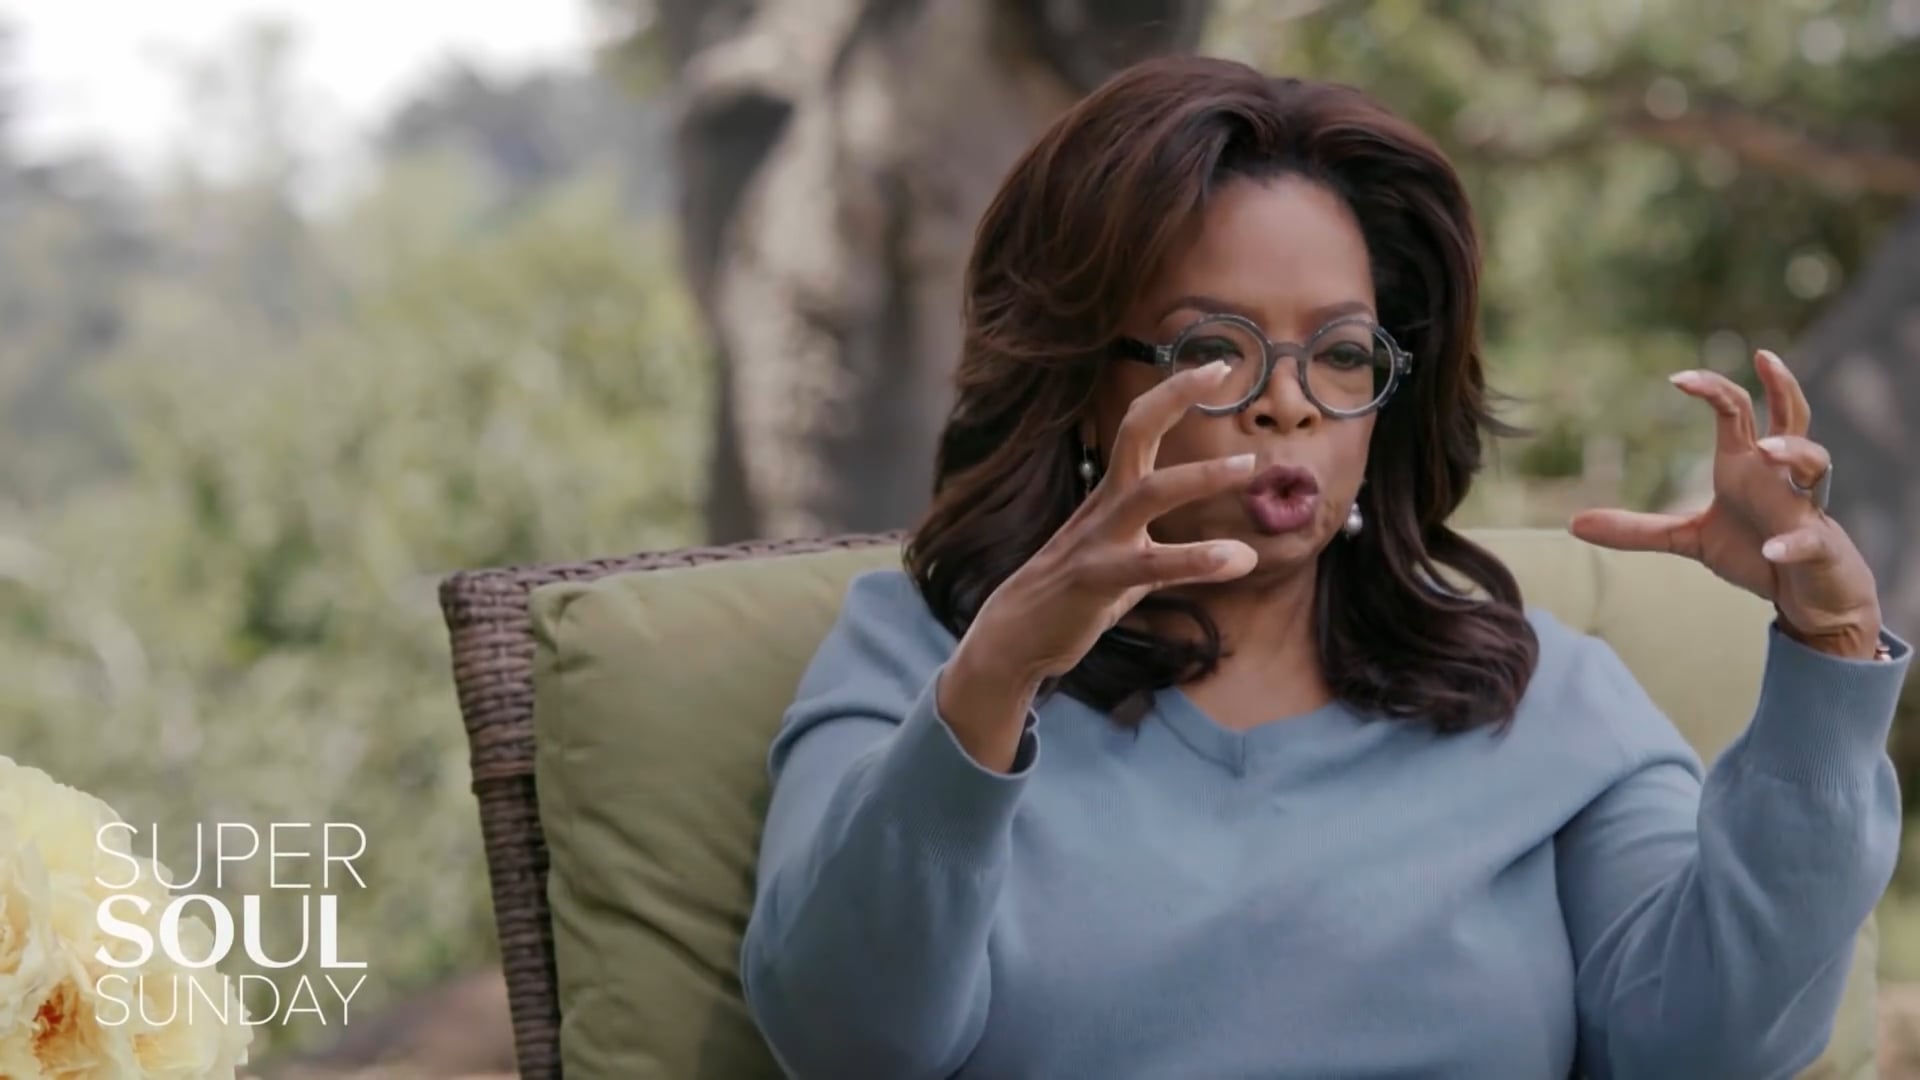 Why Do We Assume That Everyone's Telling The Truth   SuperSoul Sunday   Oprah Winfrey Network